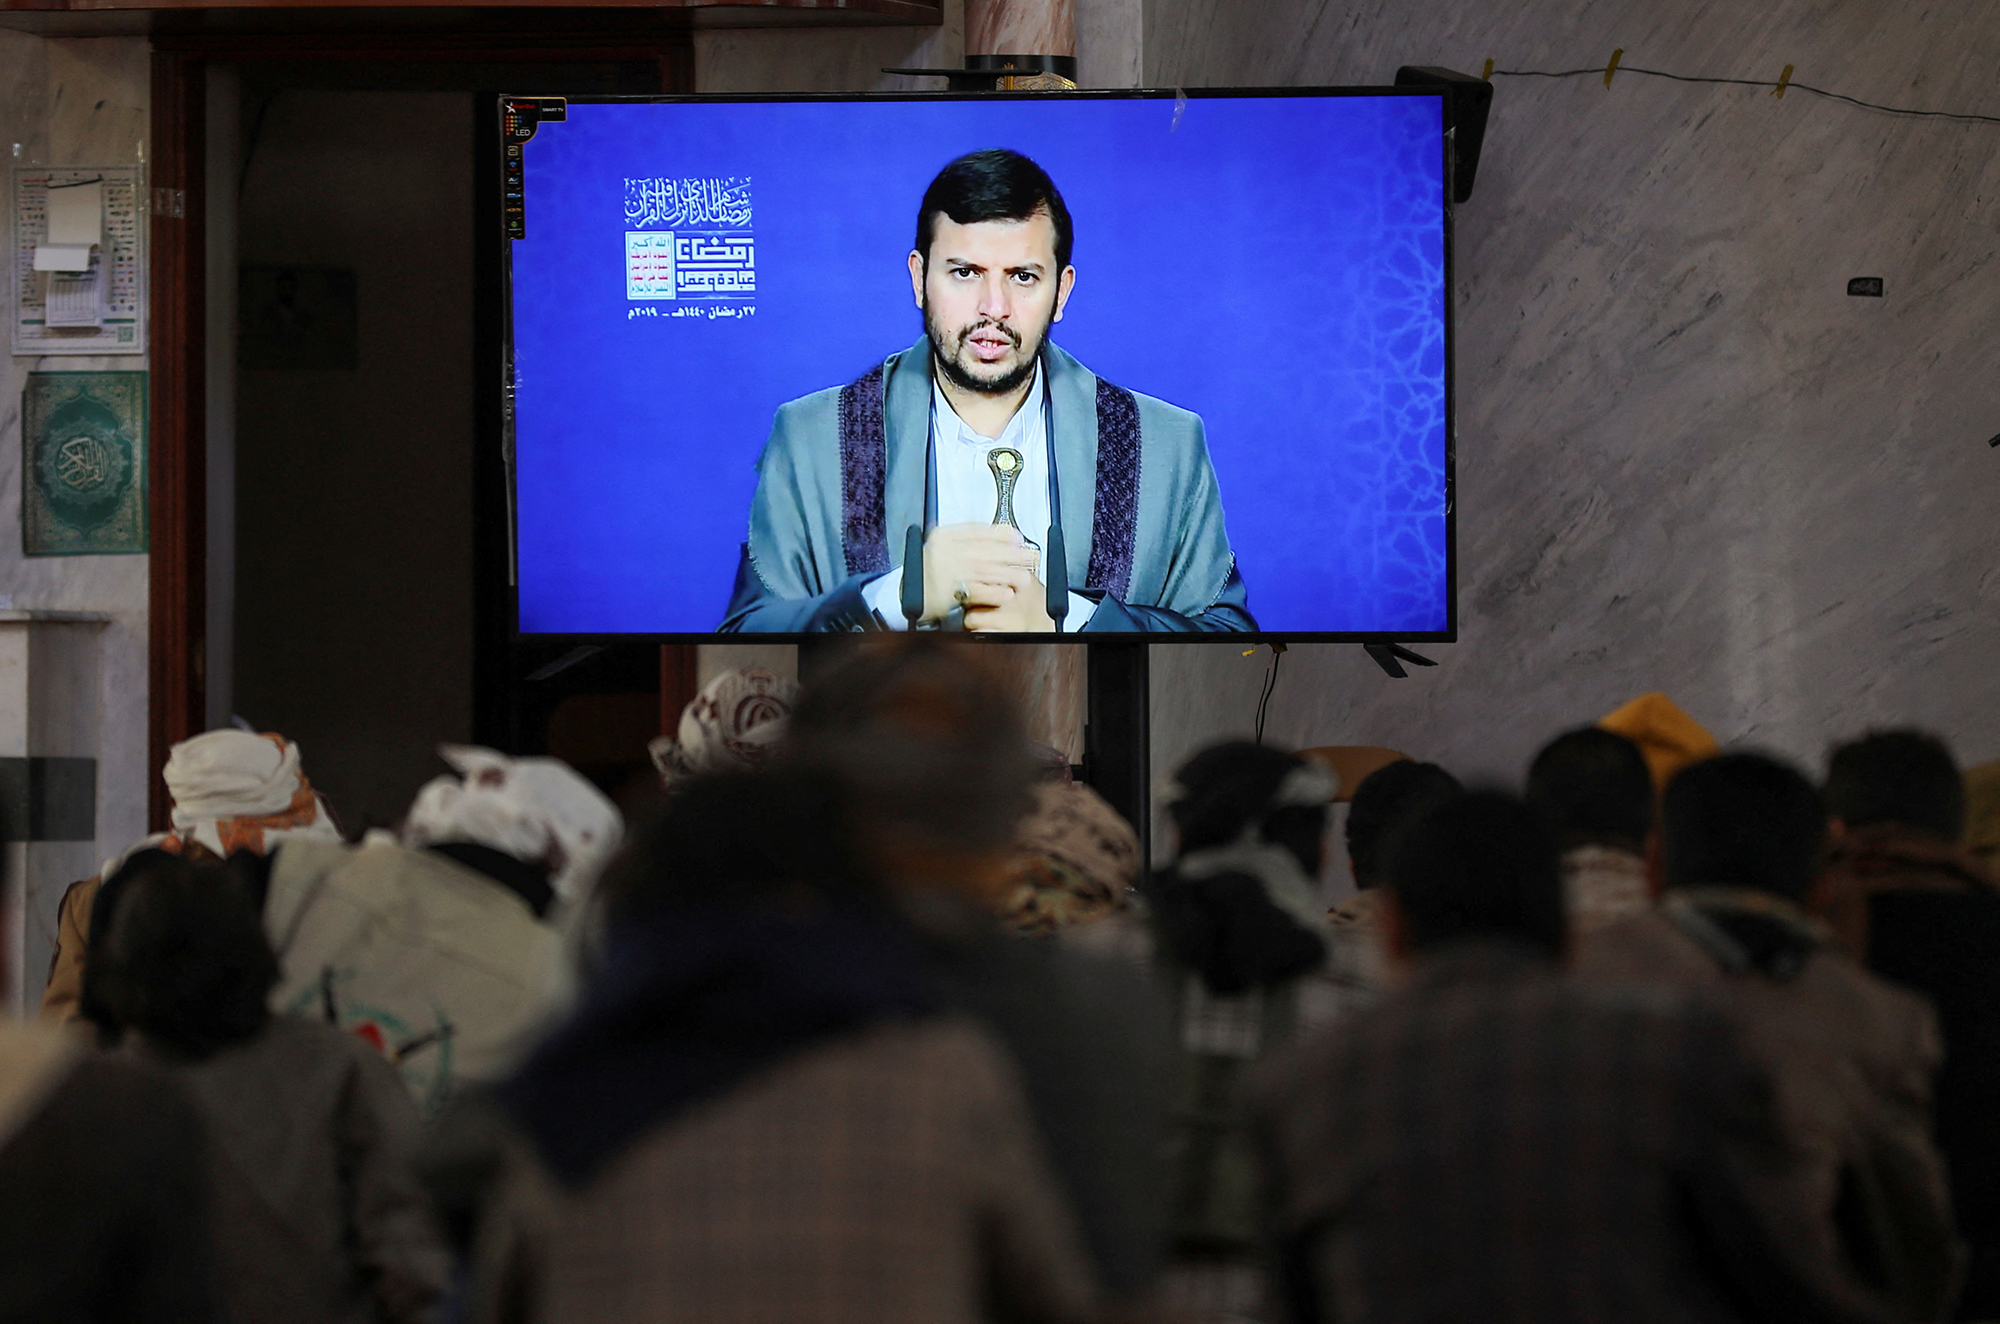 Newly recruited Houthi fighters watch a recorded lecture on Israel and the Jews by the Houthi movement's top leader, Abdul-Malik al-Houthi, during a ceremony at the end of their training in Sanaa, Yemen, on January 11.